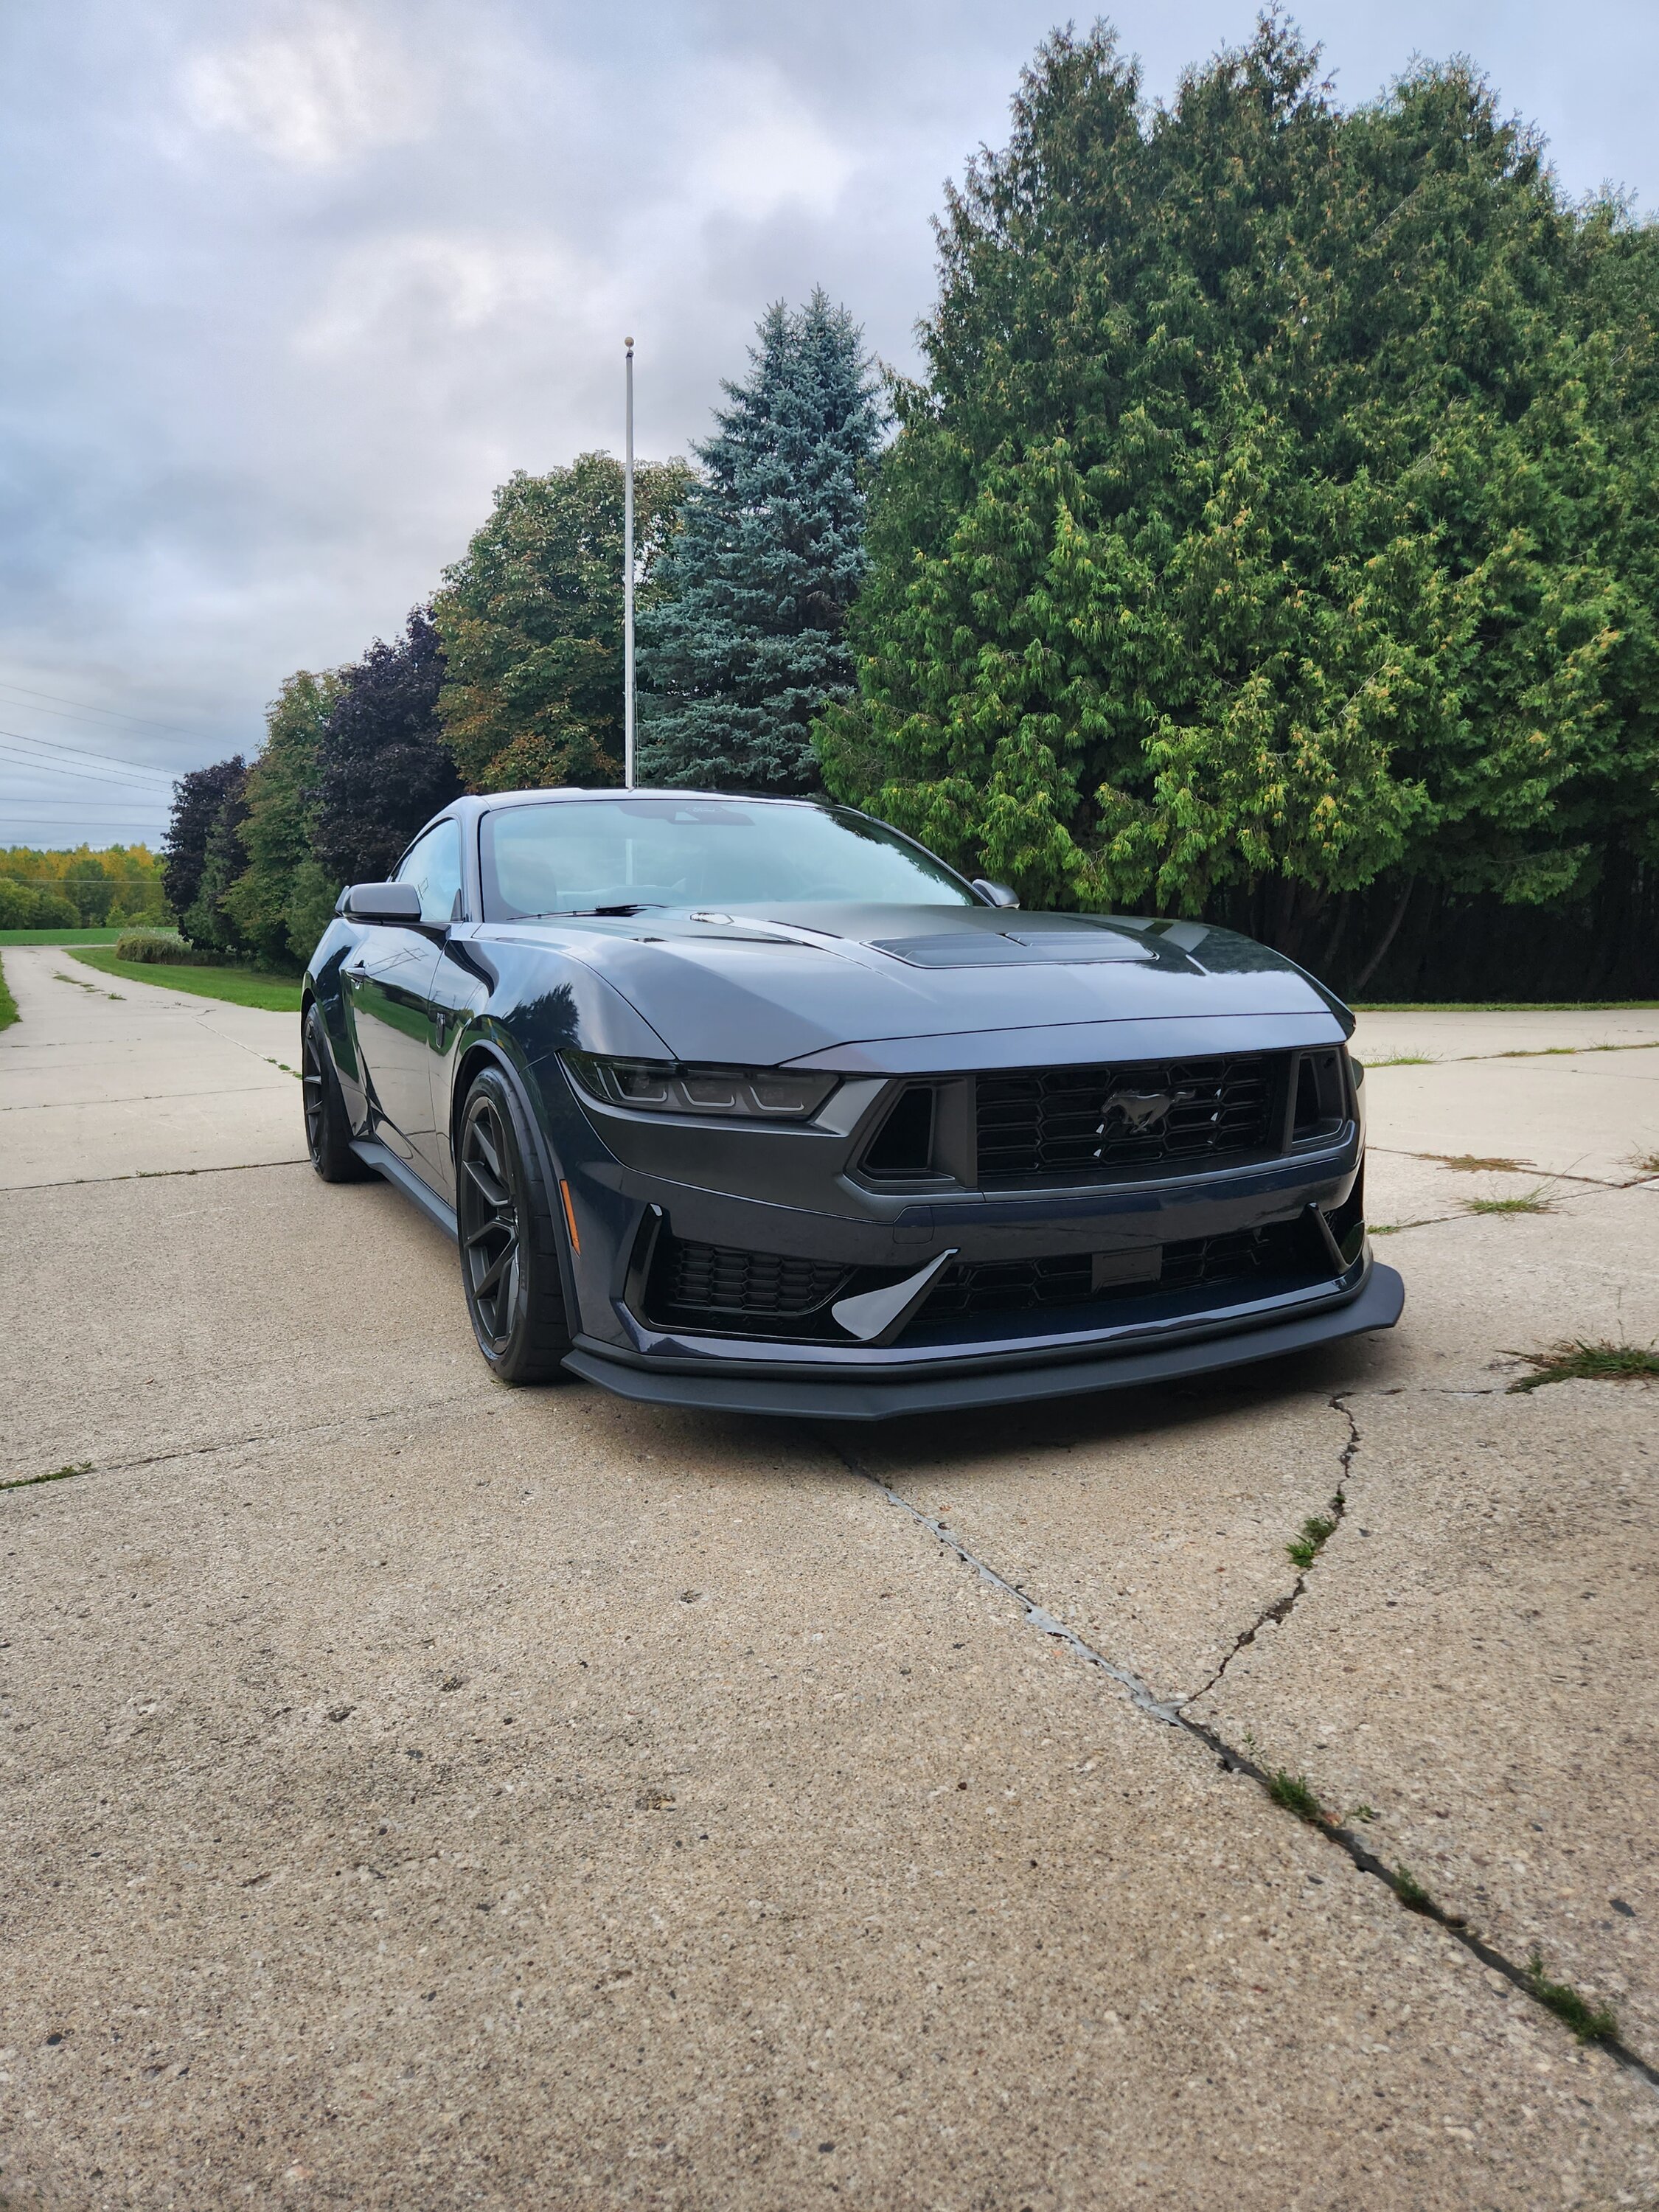 S650 Mustang Delivery Pics & Video: Pyroguy's Blue Ember Dark Horse, HP 20230907_184918